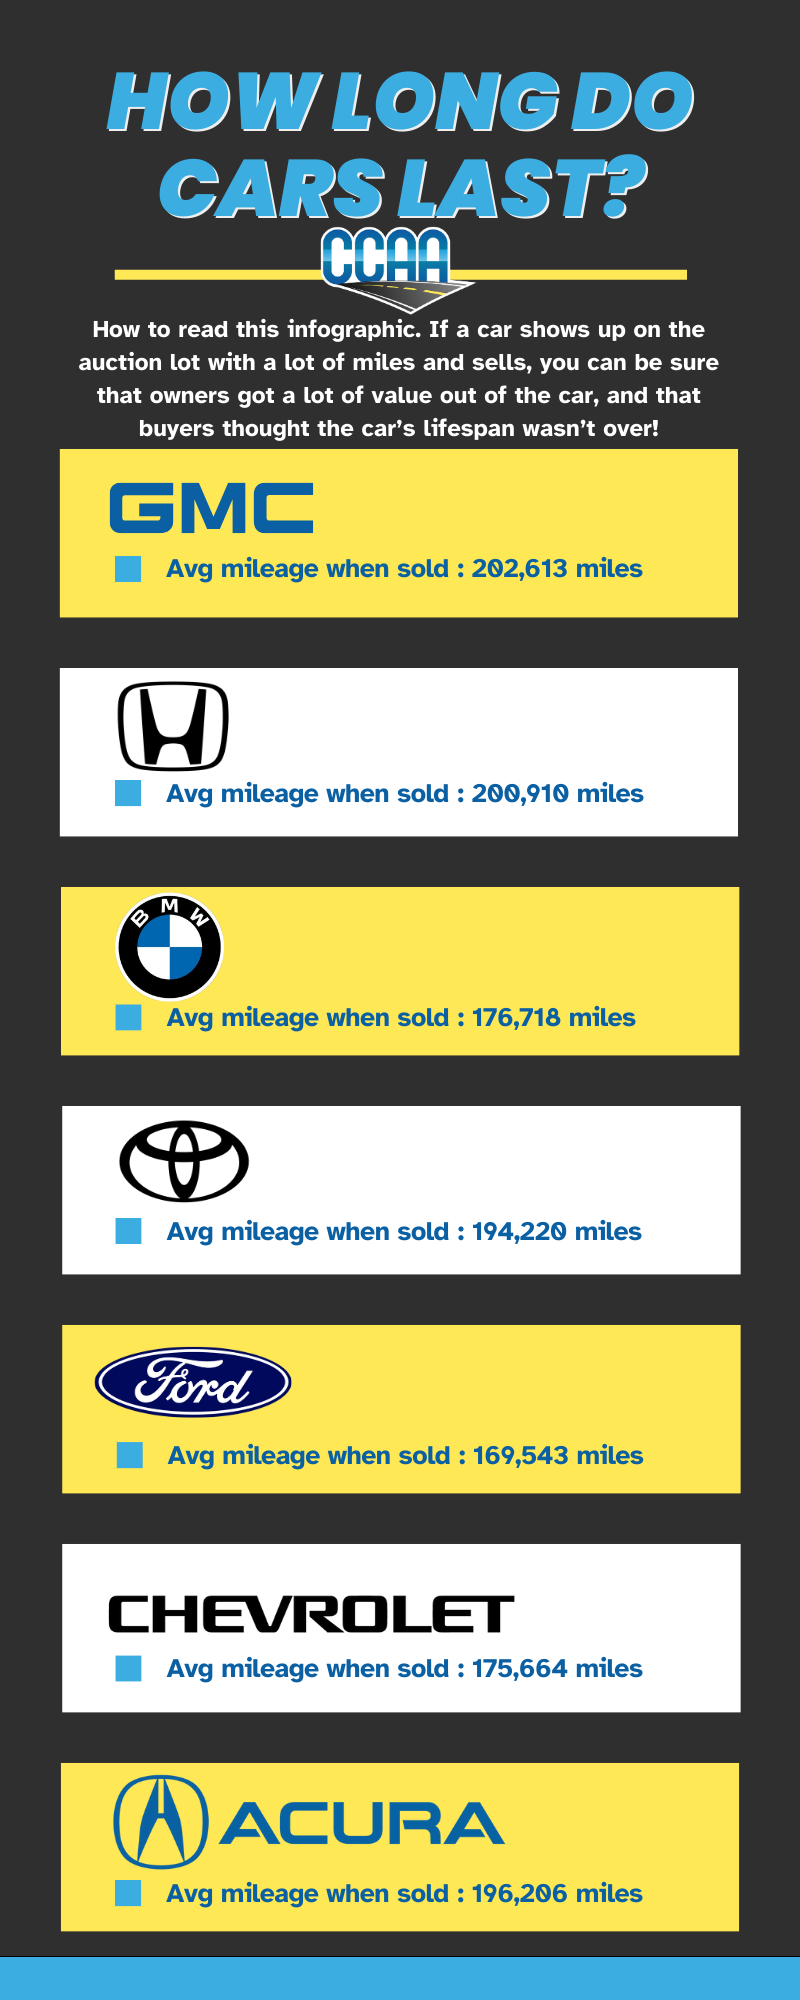 Here's an infographic guiding you through the lifespan of popular car brands based on auction data.